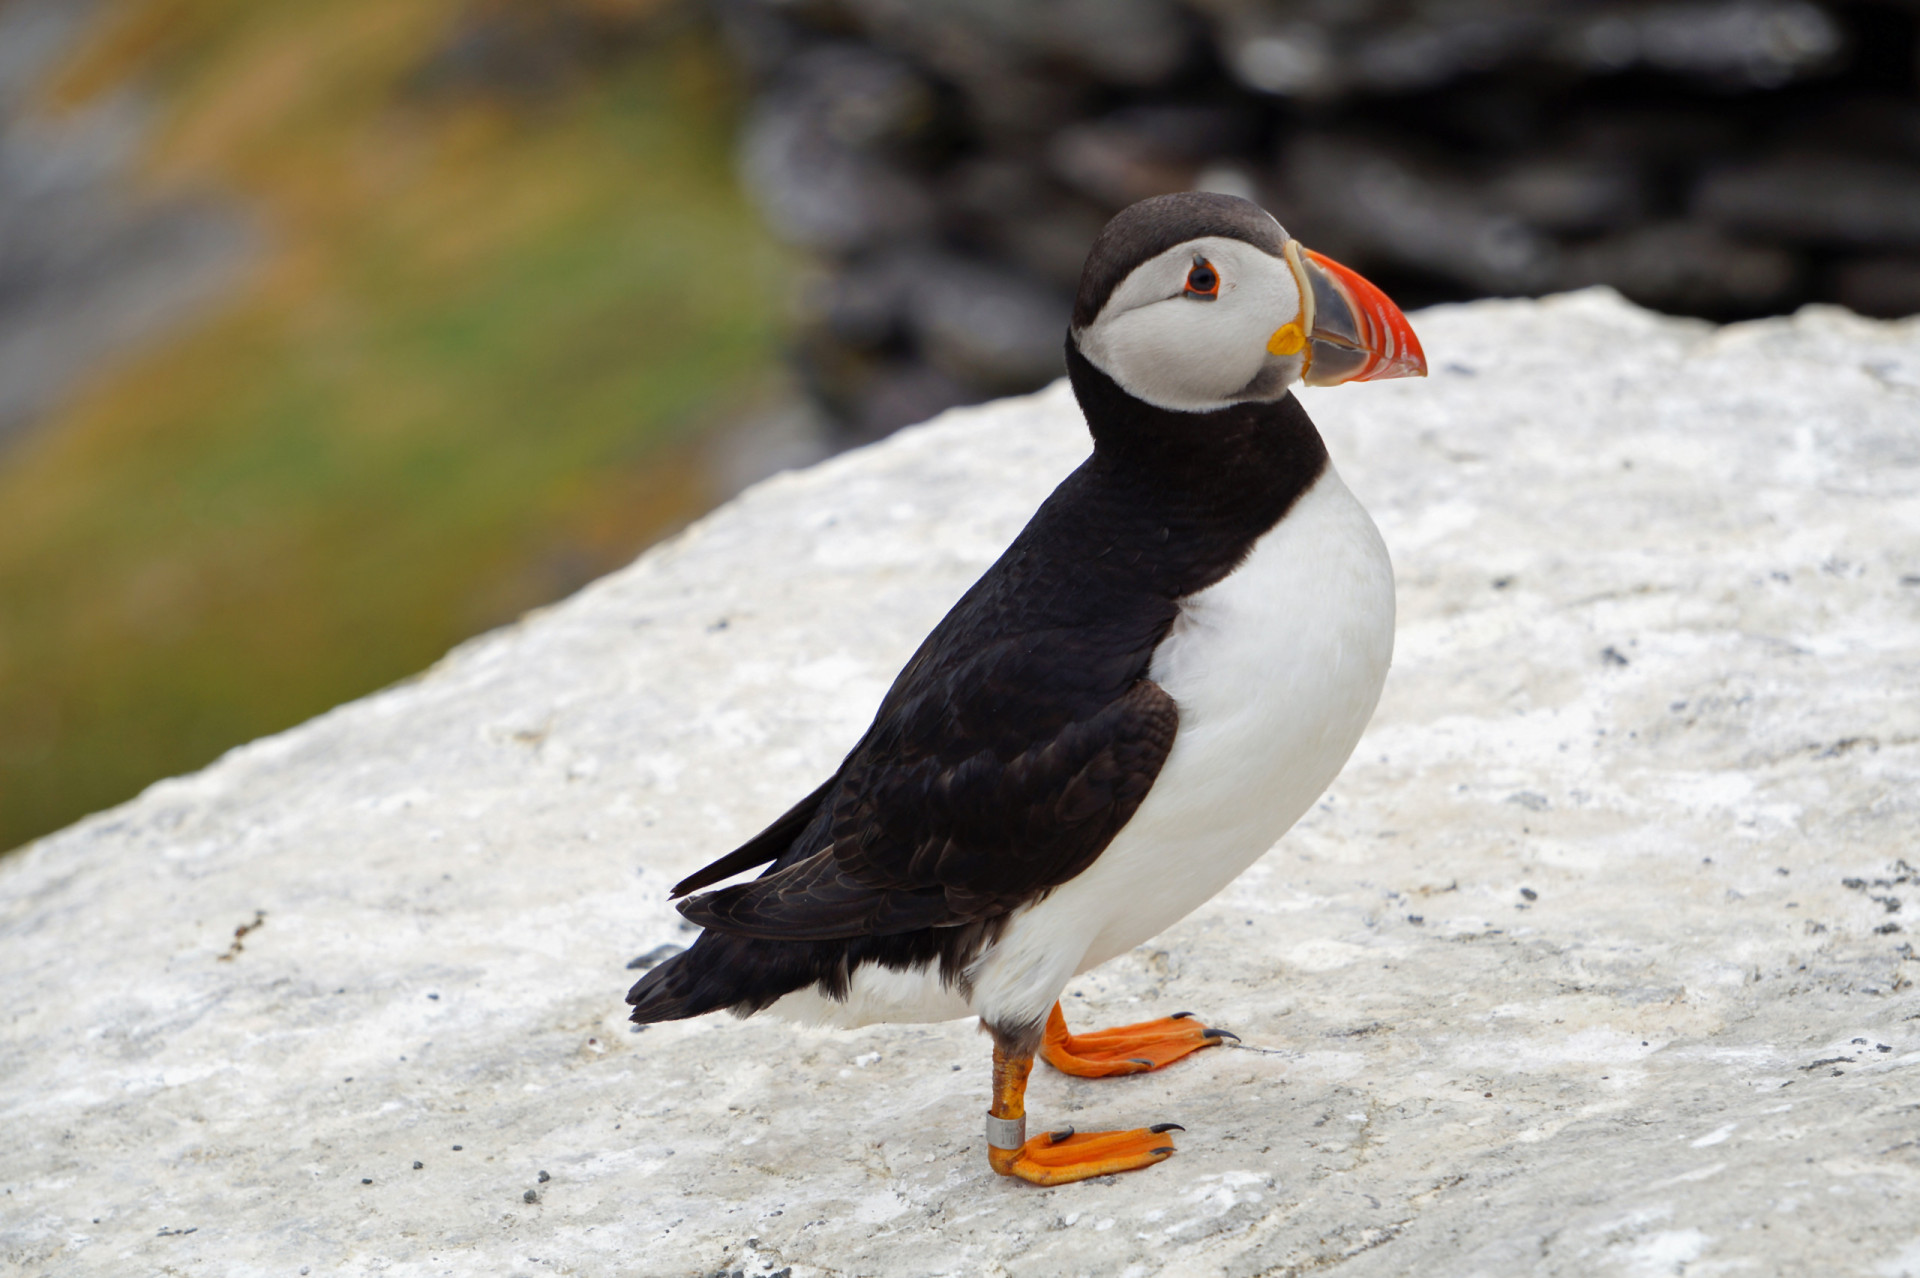 <p>Puffins nest on Skellig Michael, which is home to a breeding colony from May to August. Each year thousands of puffins descend here, to raise their young.</p><p><a href="https://www.msn.com/en-au/community/channel/vid-7xx8mnucu55yw63we9va2gwr7uihbxwc68fxqp25x6tg4ftibpra?cvid=94631541bc0f4f89bfd59158d696ad7e">Follow us and access great exclusive content every day</a></p>